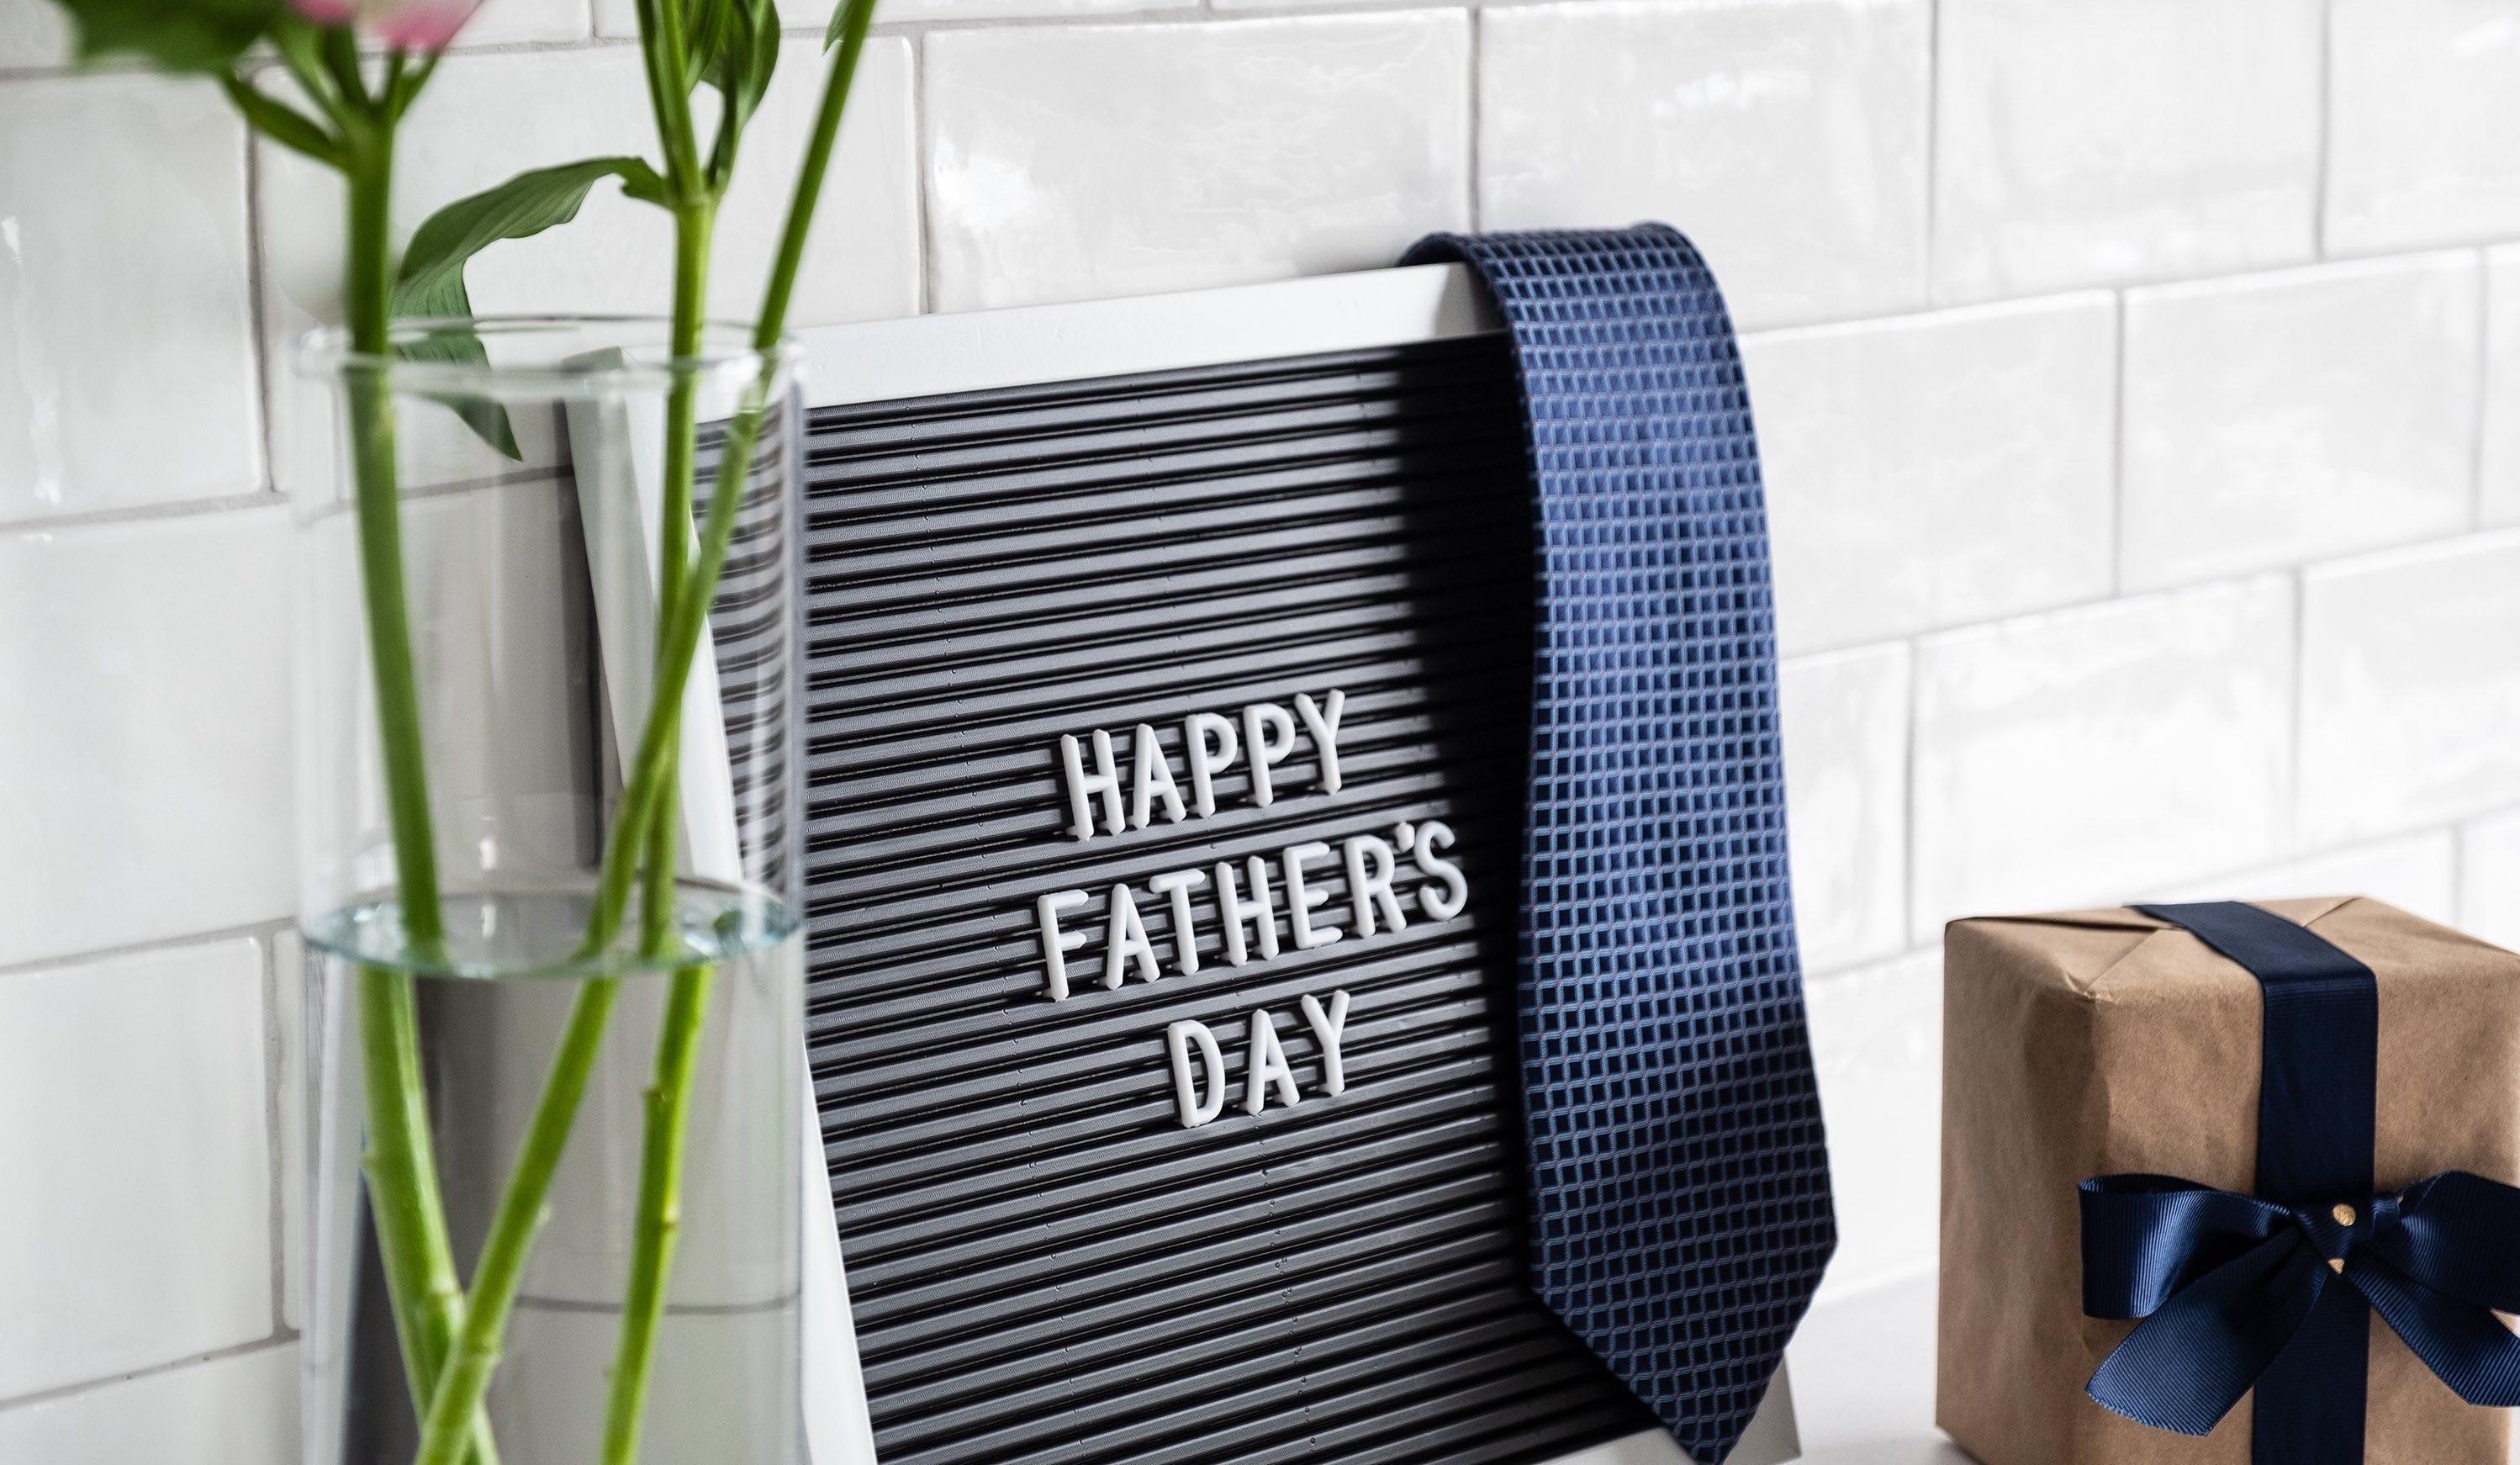 Happy Father's Day sign.